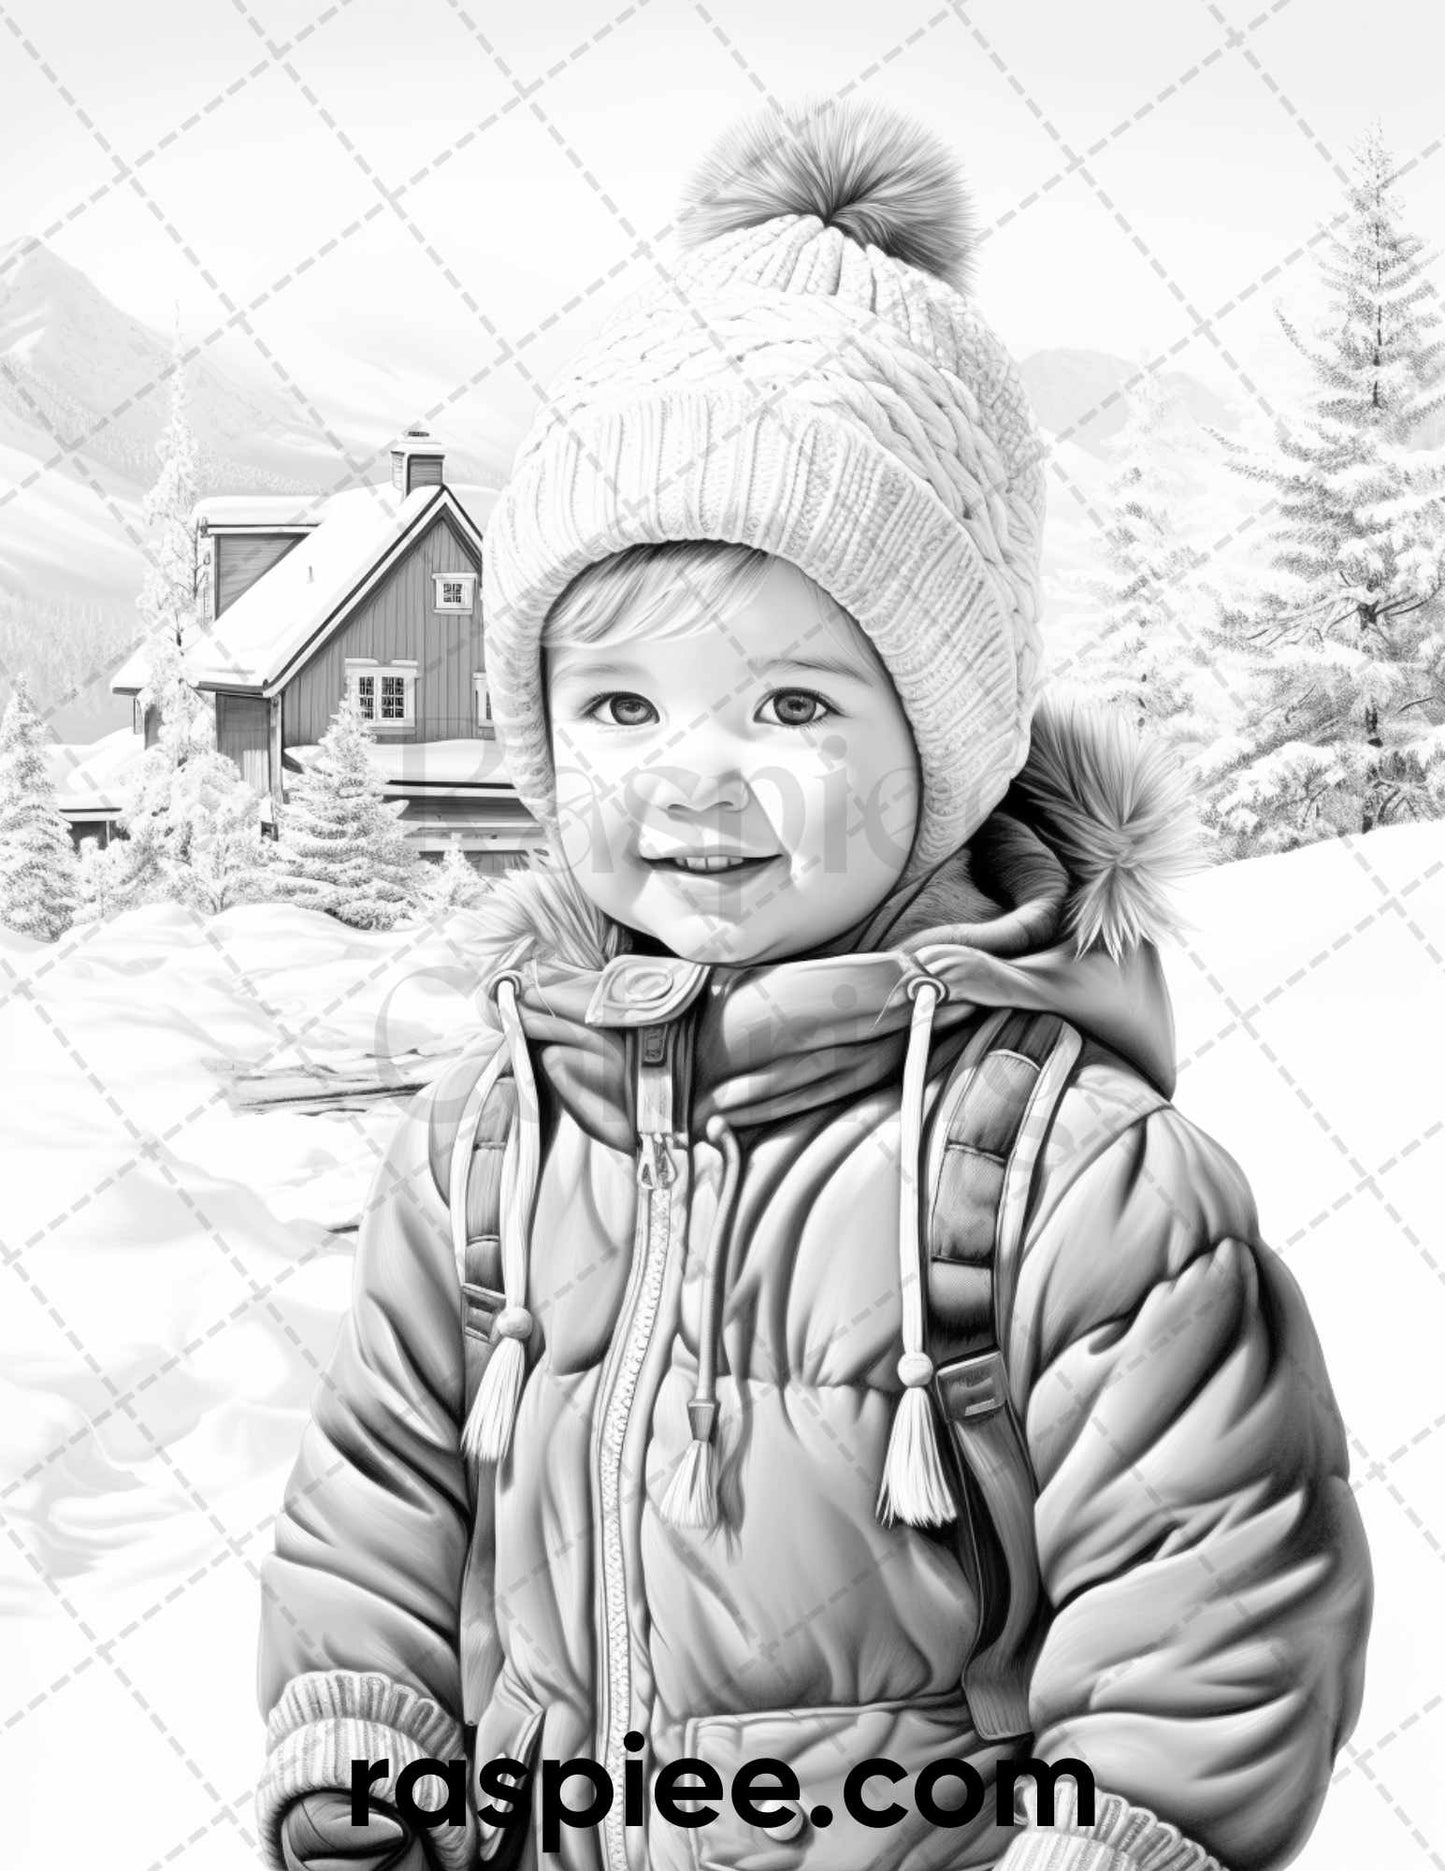 50 Baby Winter Portrait Grayscale Coloring Pages Printable for Adults, PDF File Instant Download